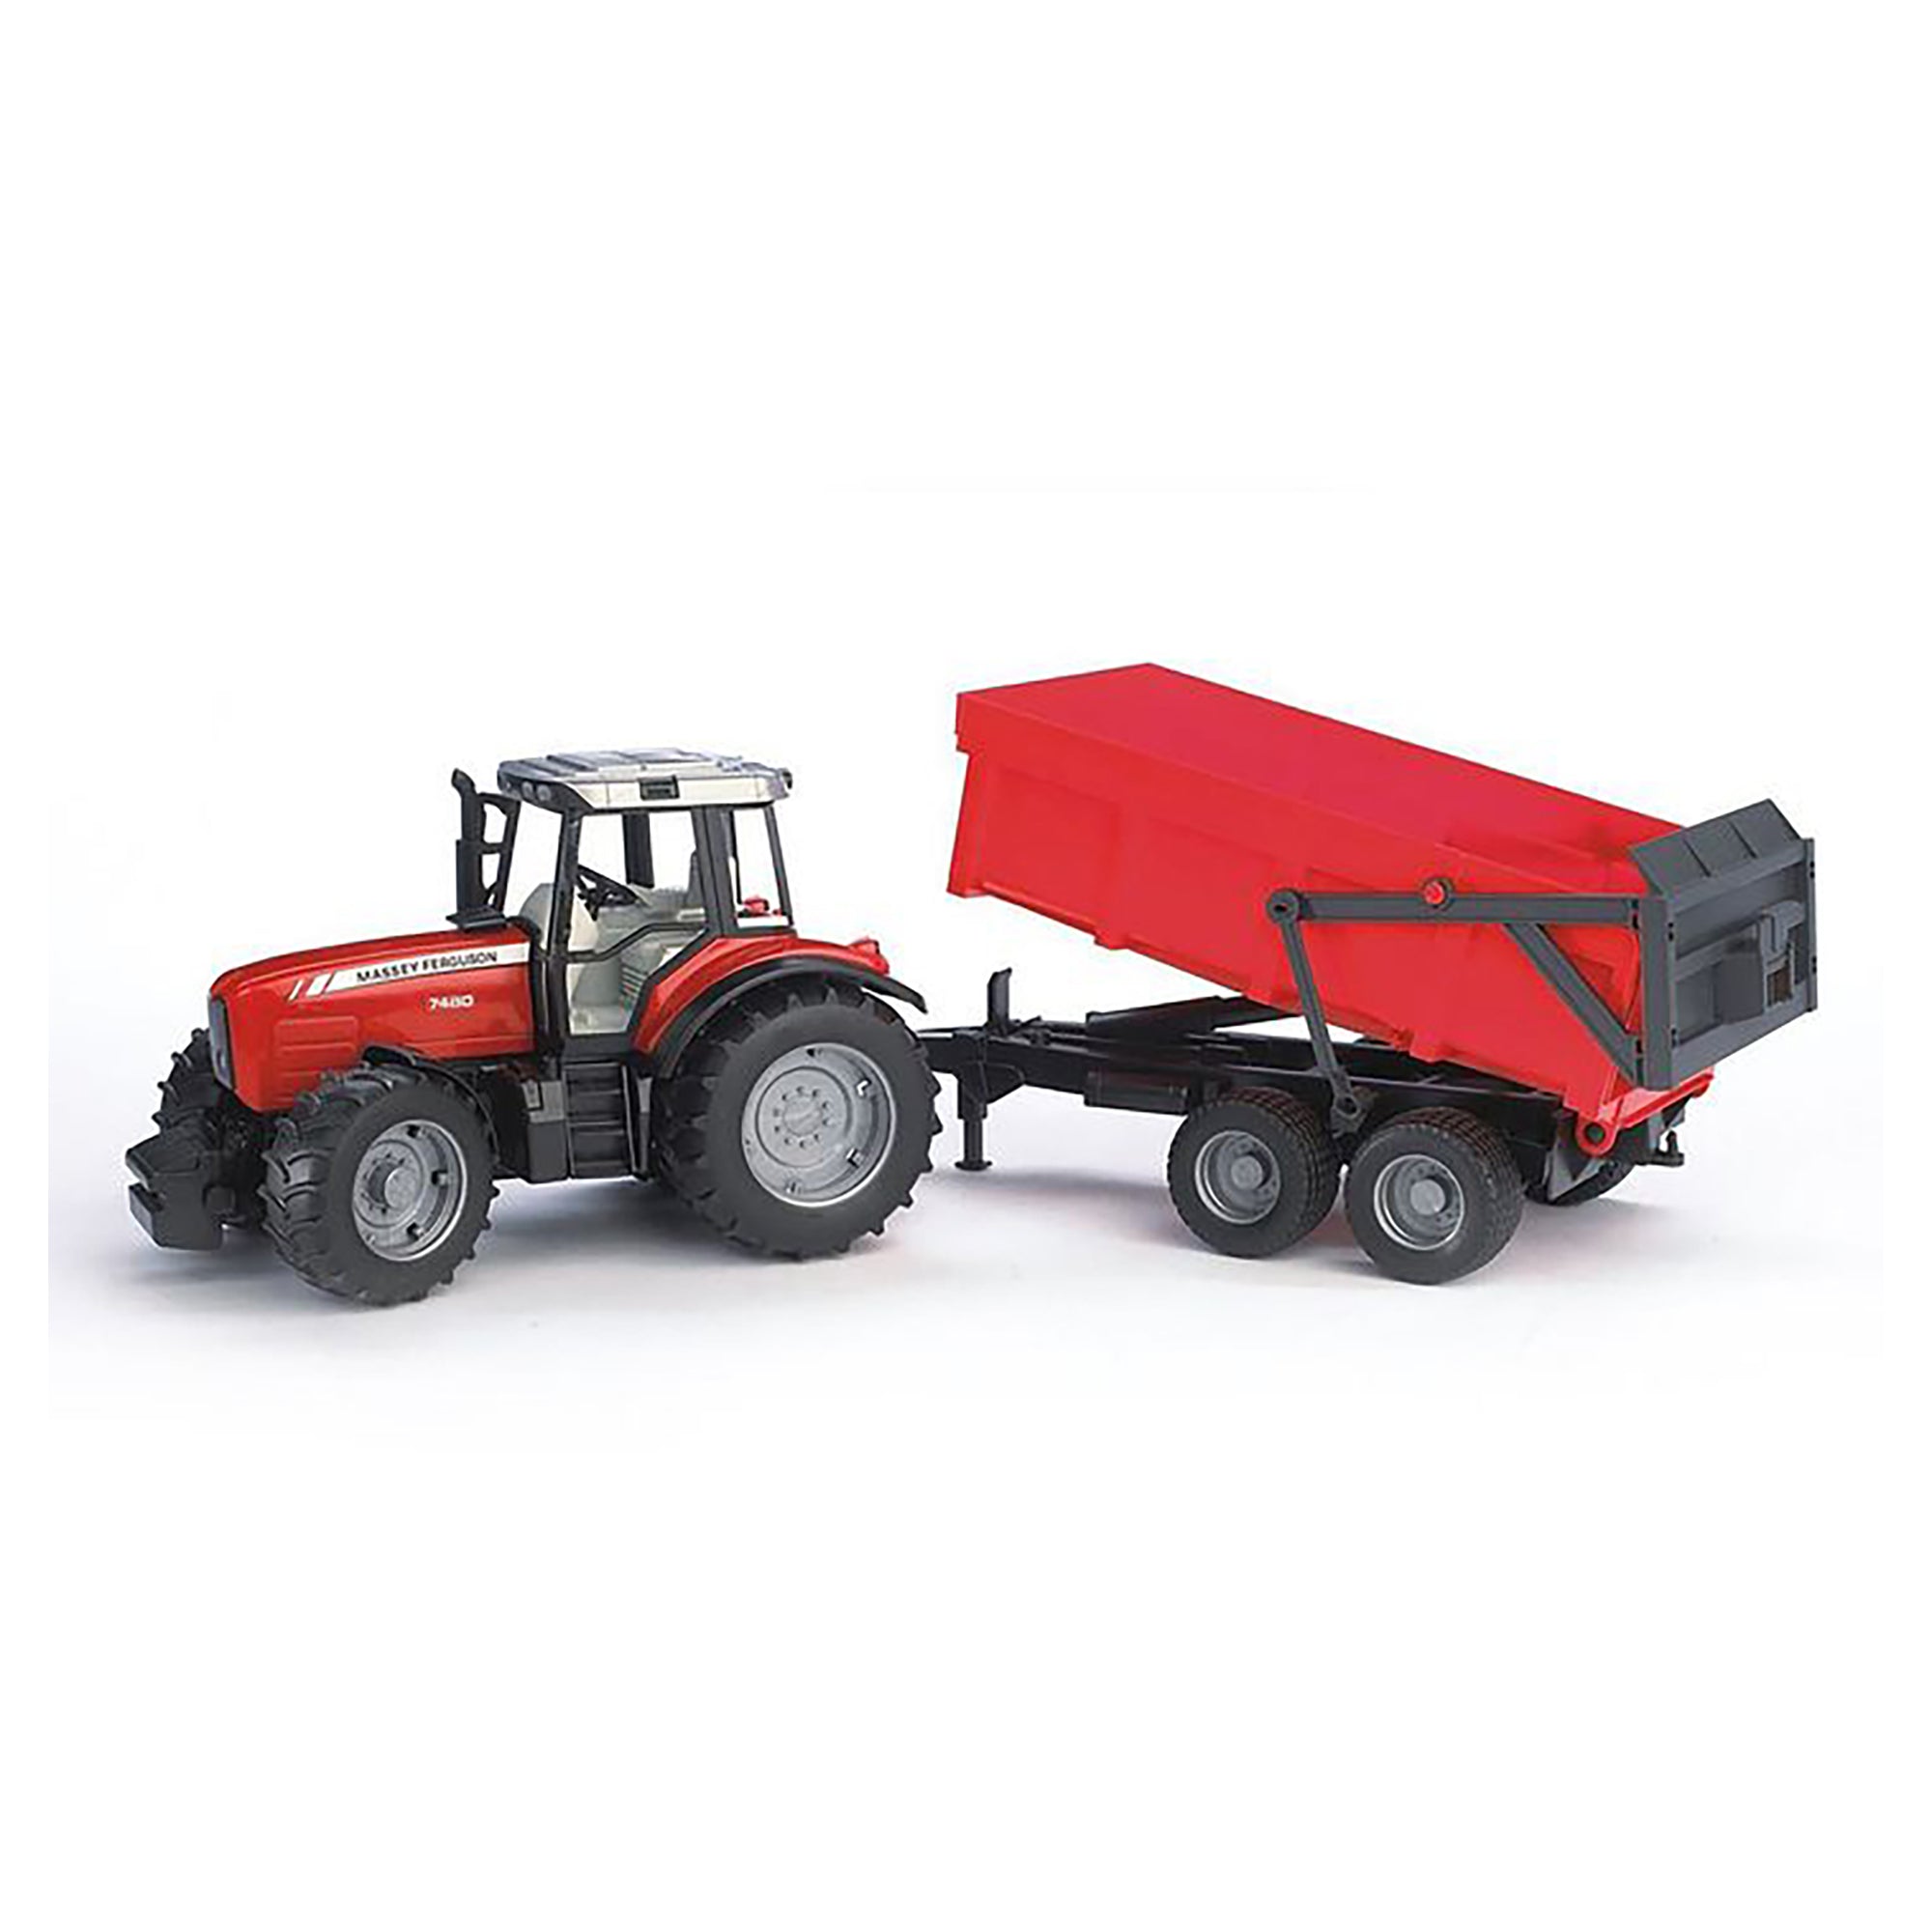 Bruder 1/16 Massey Ferguson 7480 Tractor with Tipping Trailer, Red